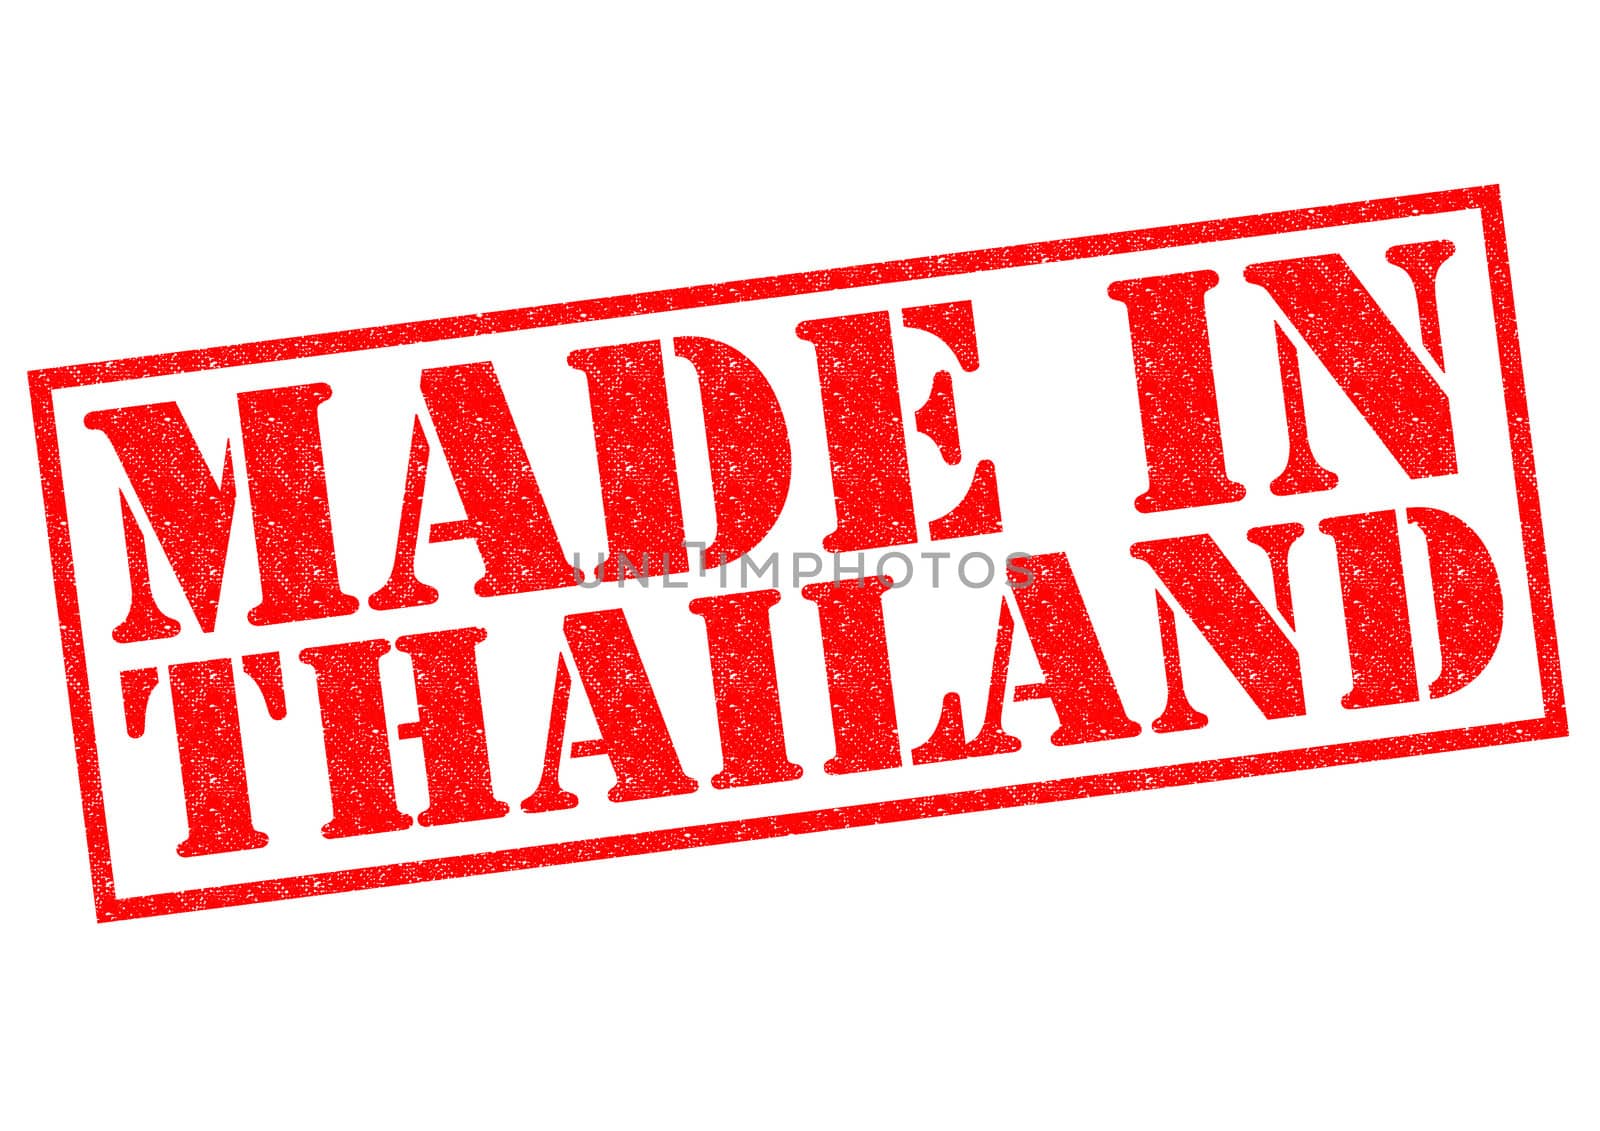 MADE IN THAILAND red Rubber Stamp over a white background.